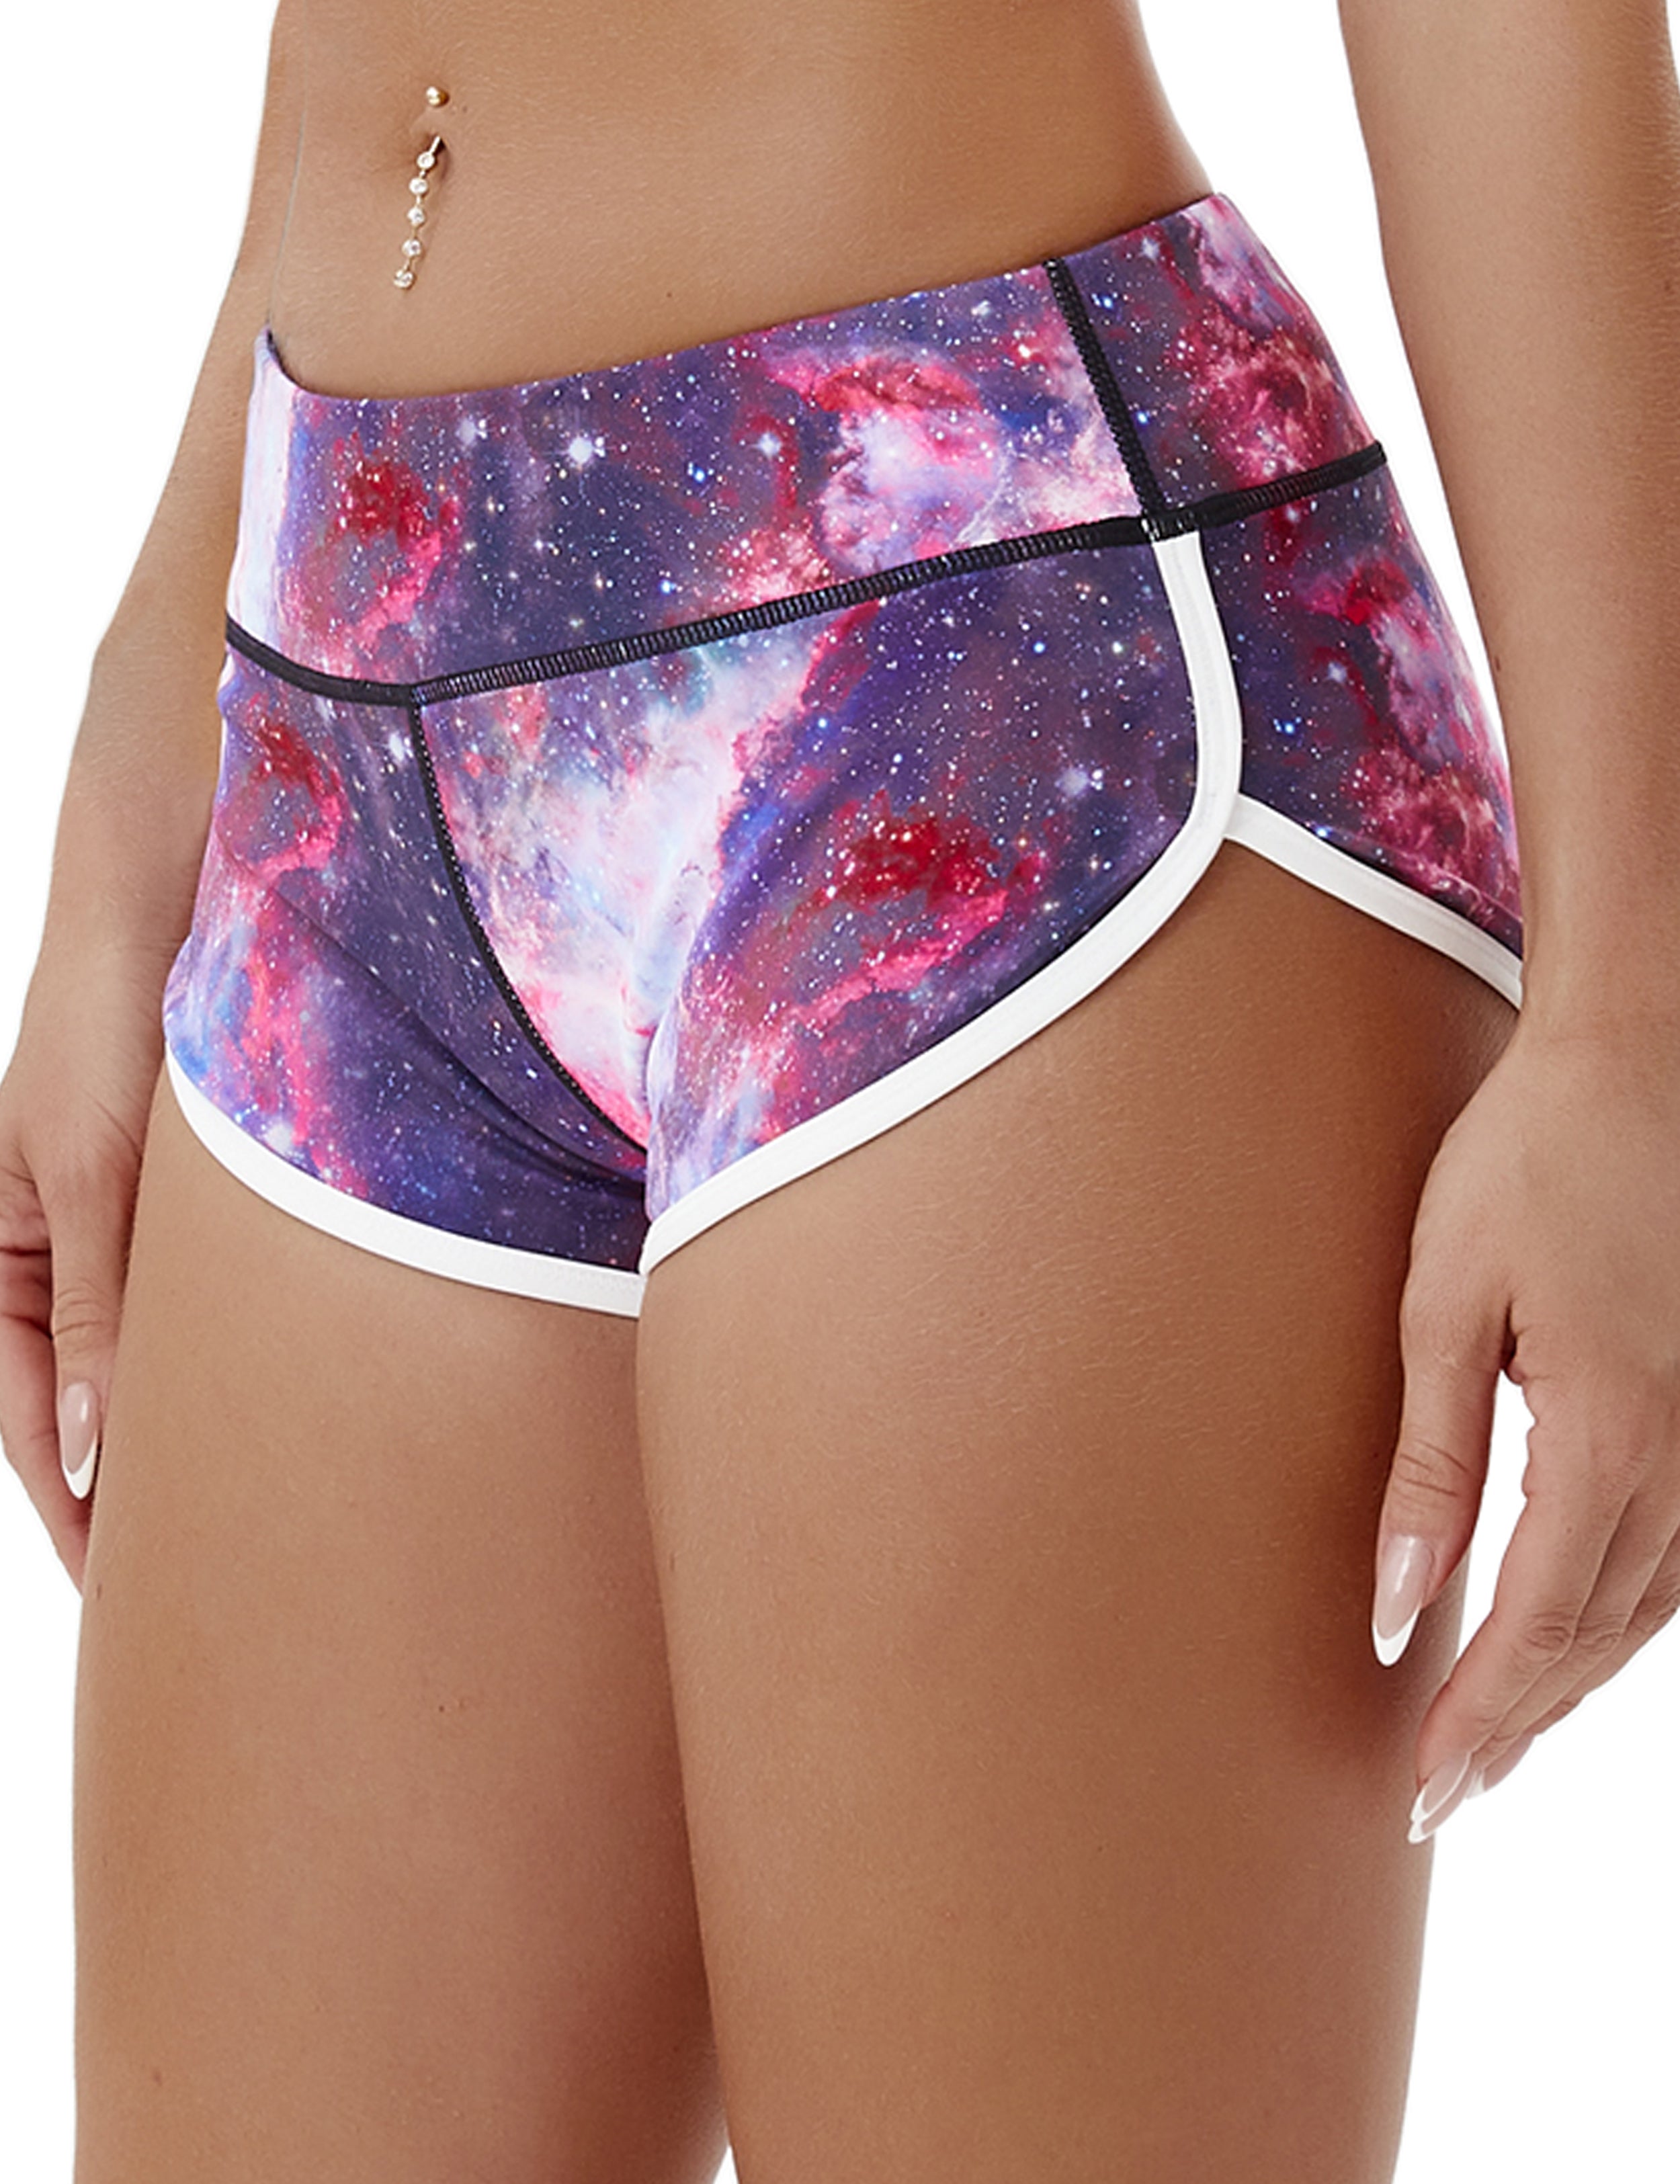 Printed Booty Yoga Shorts galaxy Sleek, soft, smooth and totally comfortable: our newest sexy style is here. Softest-ever fabric High elasticity High density 4-way stretch Fabric doesn't attract lint easily No see-through Moisture-wicking Machine wash 78% Polyester, 22% Spandex